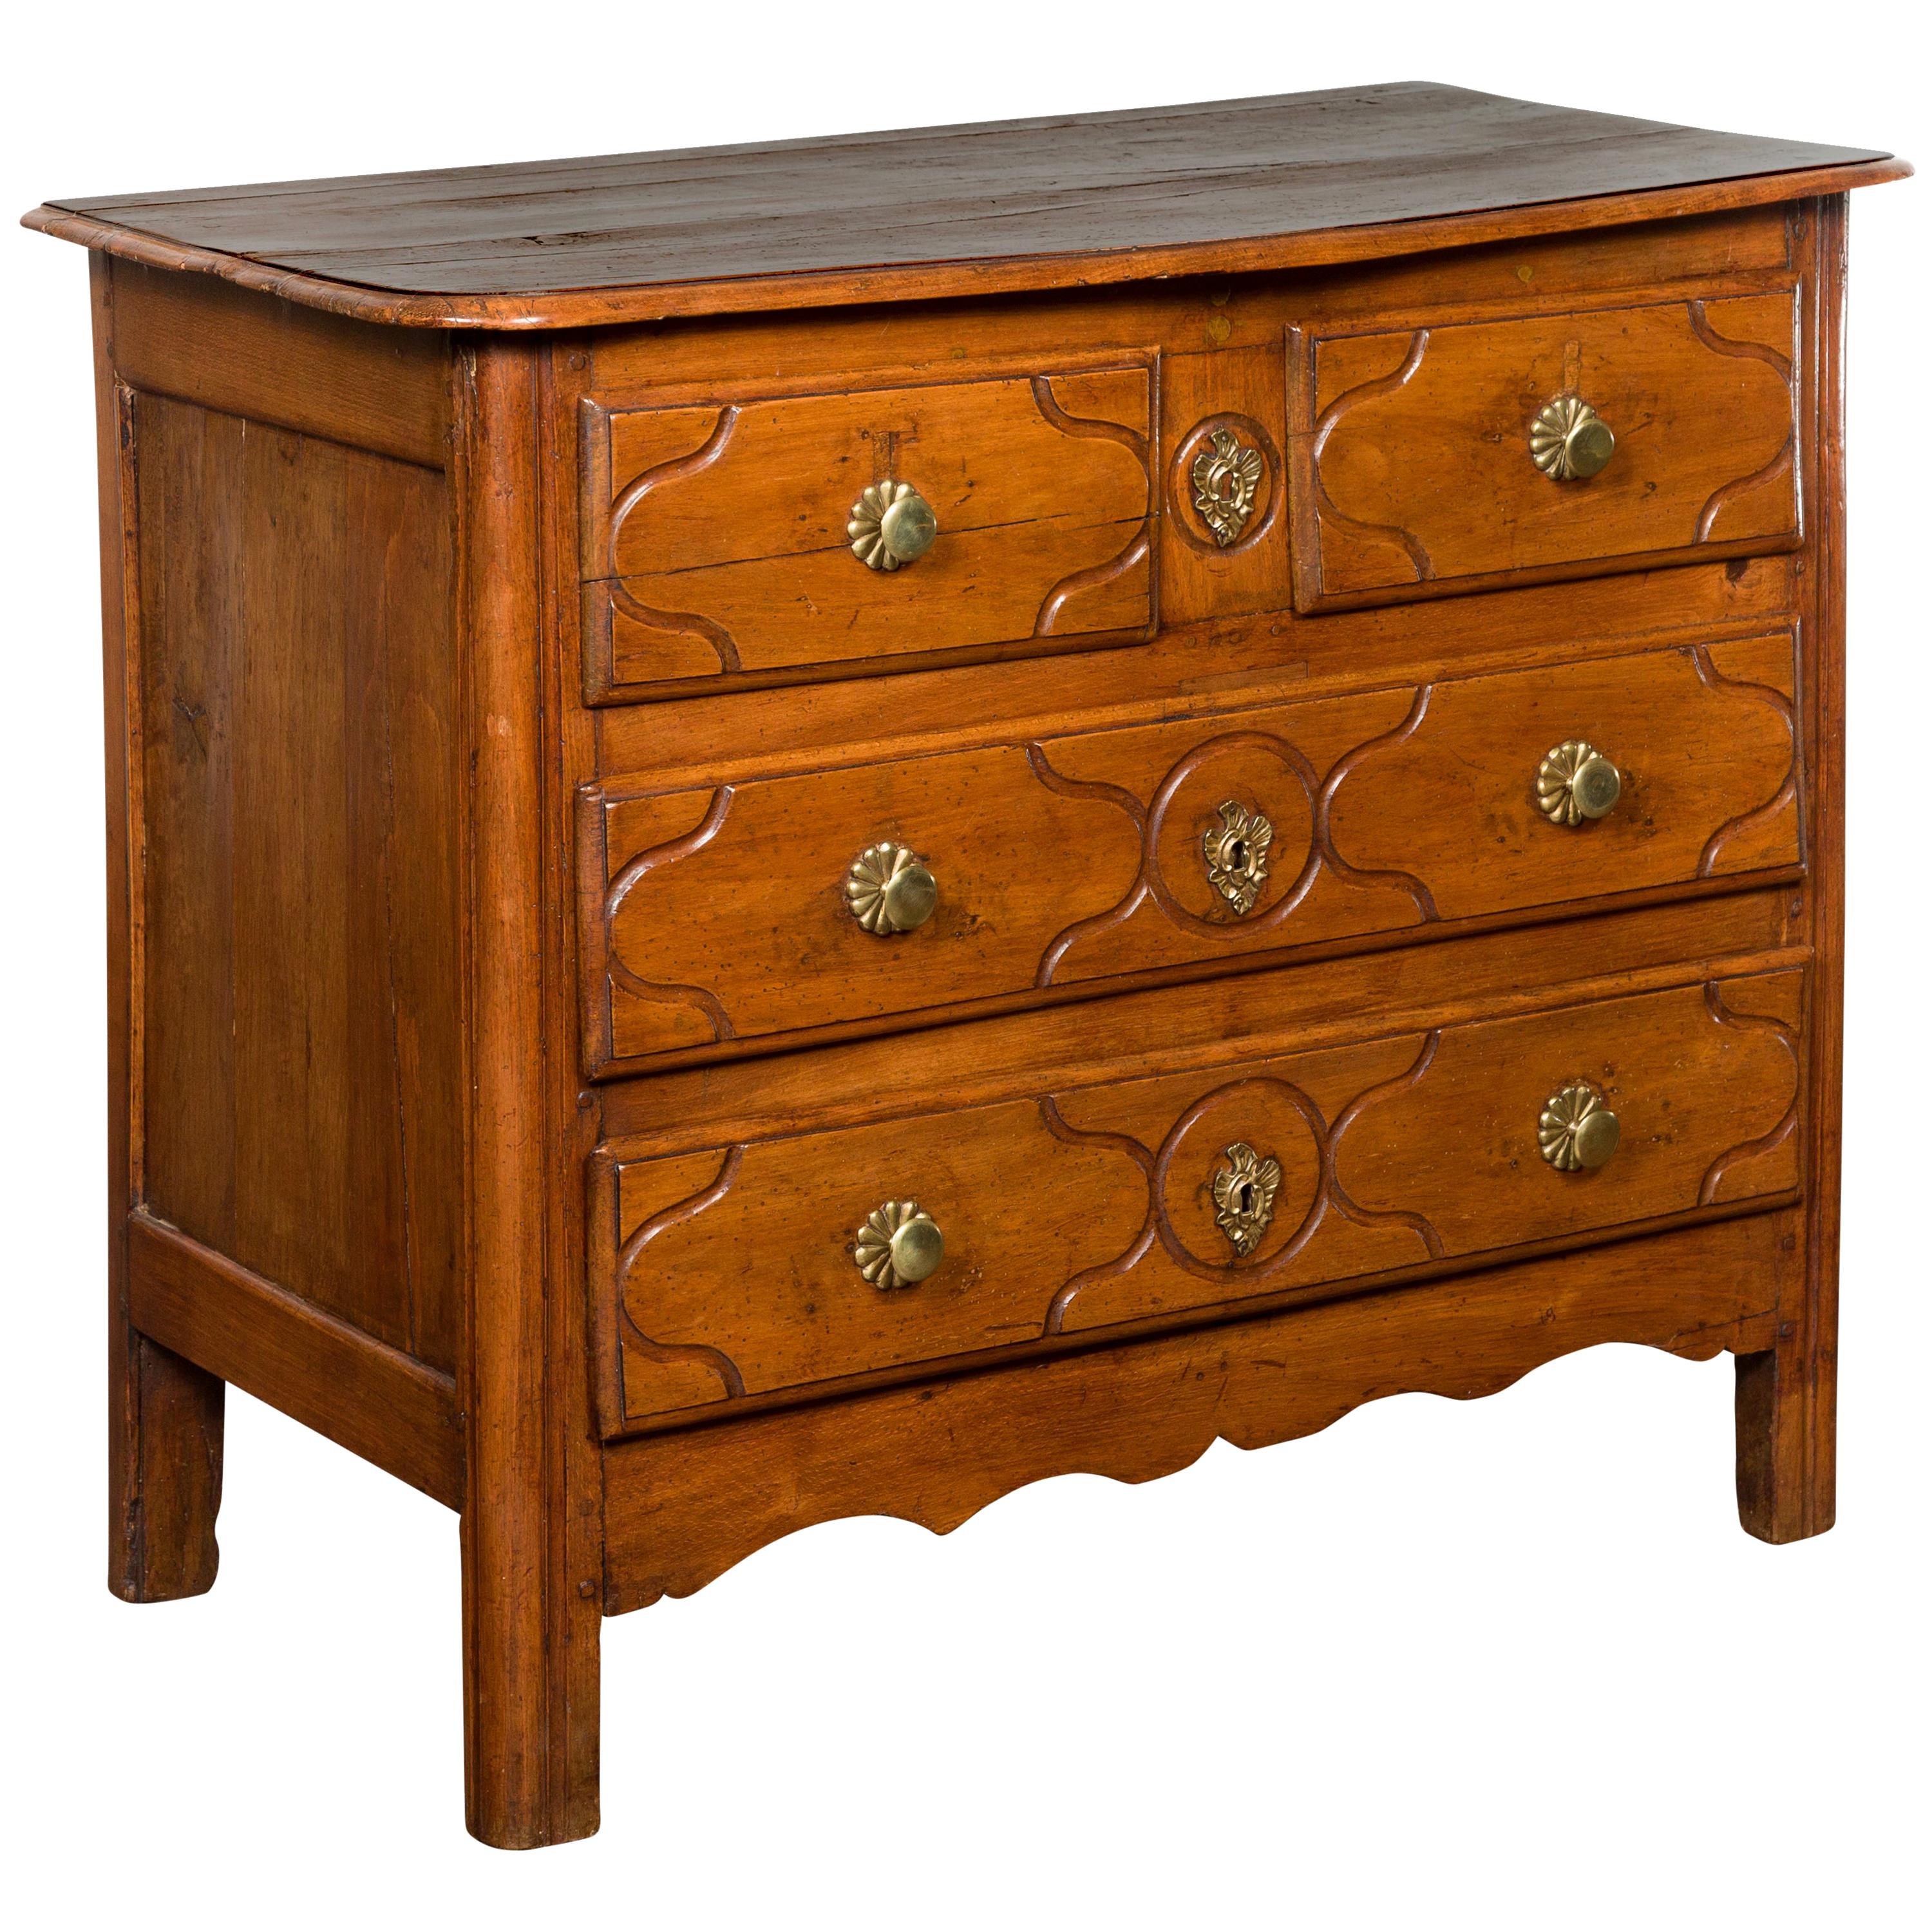 French 1820s Walnut Four-Drawer Chest with Carved Geometric Motifs